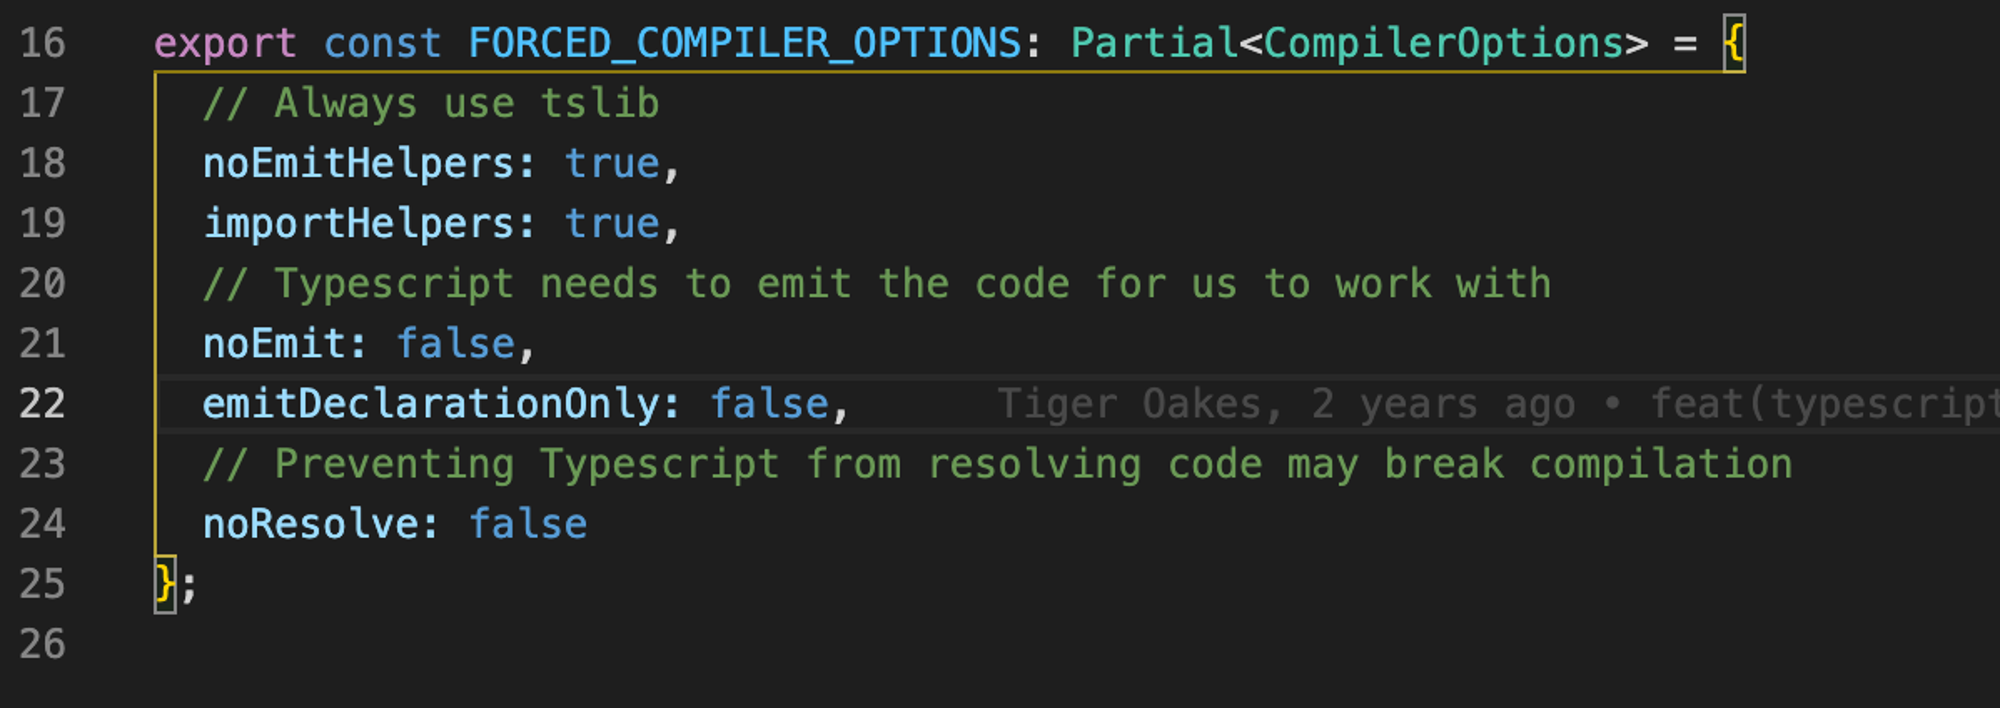 FORCED_COMPILER_OPTIONS